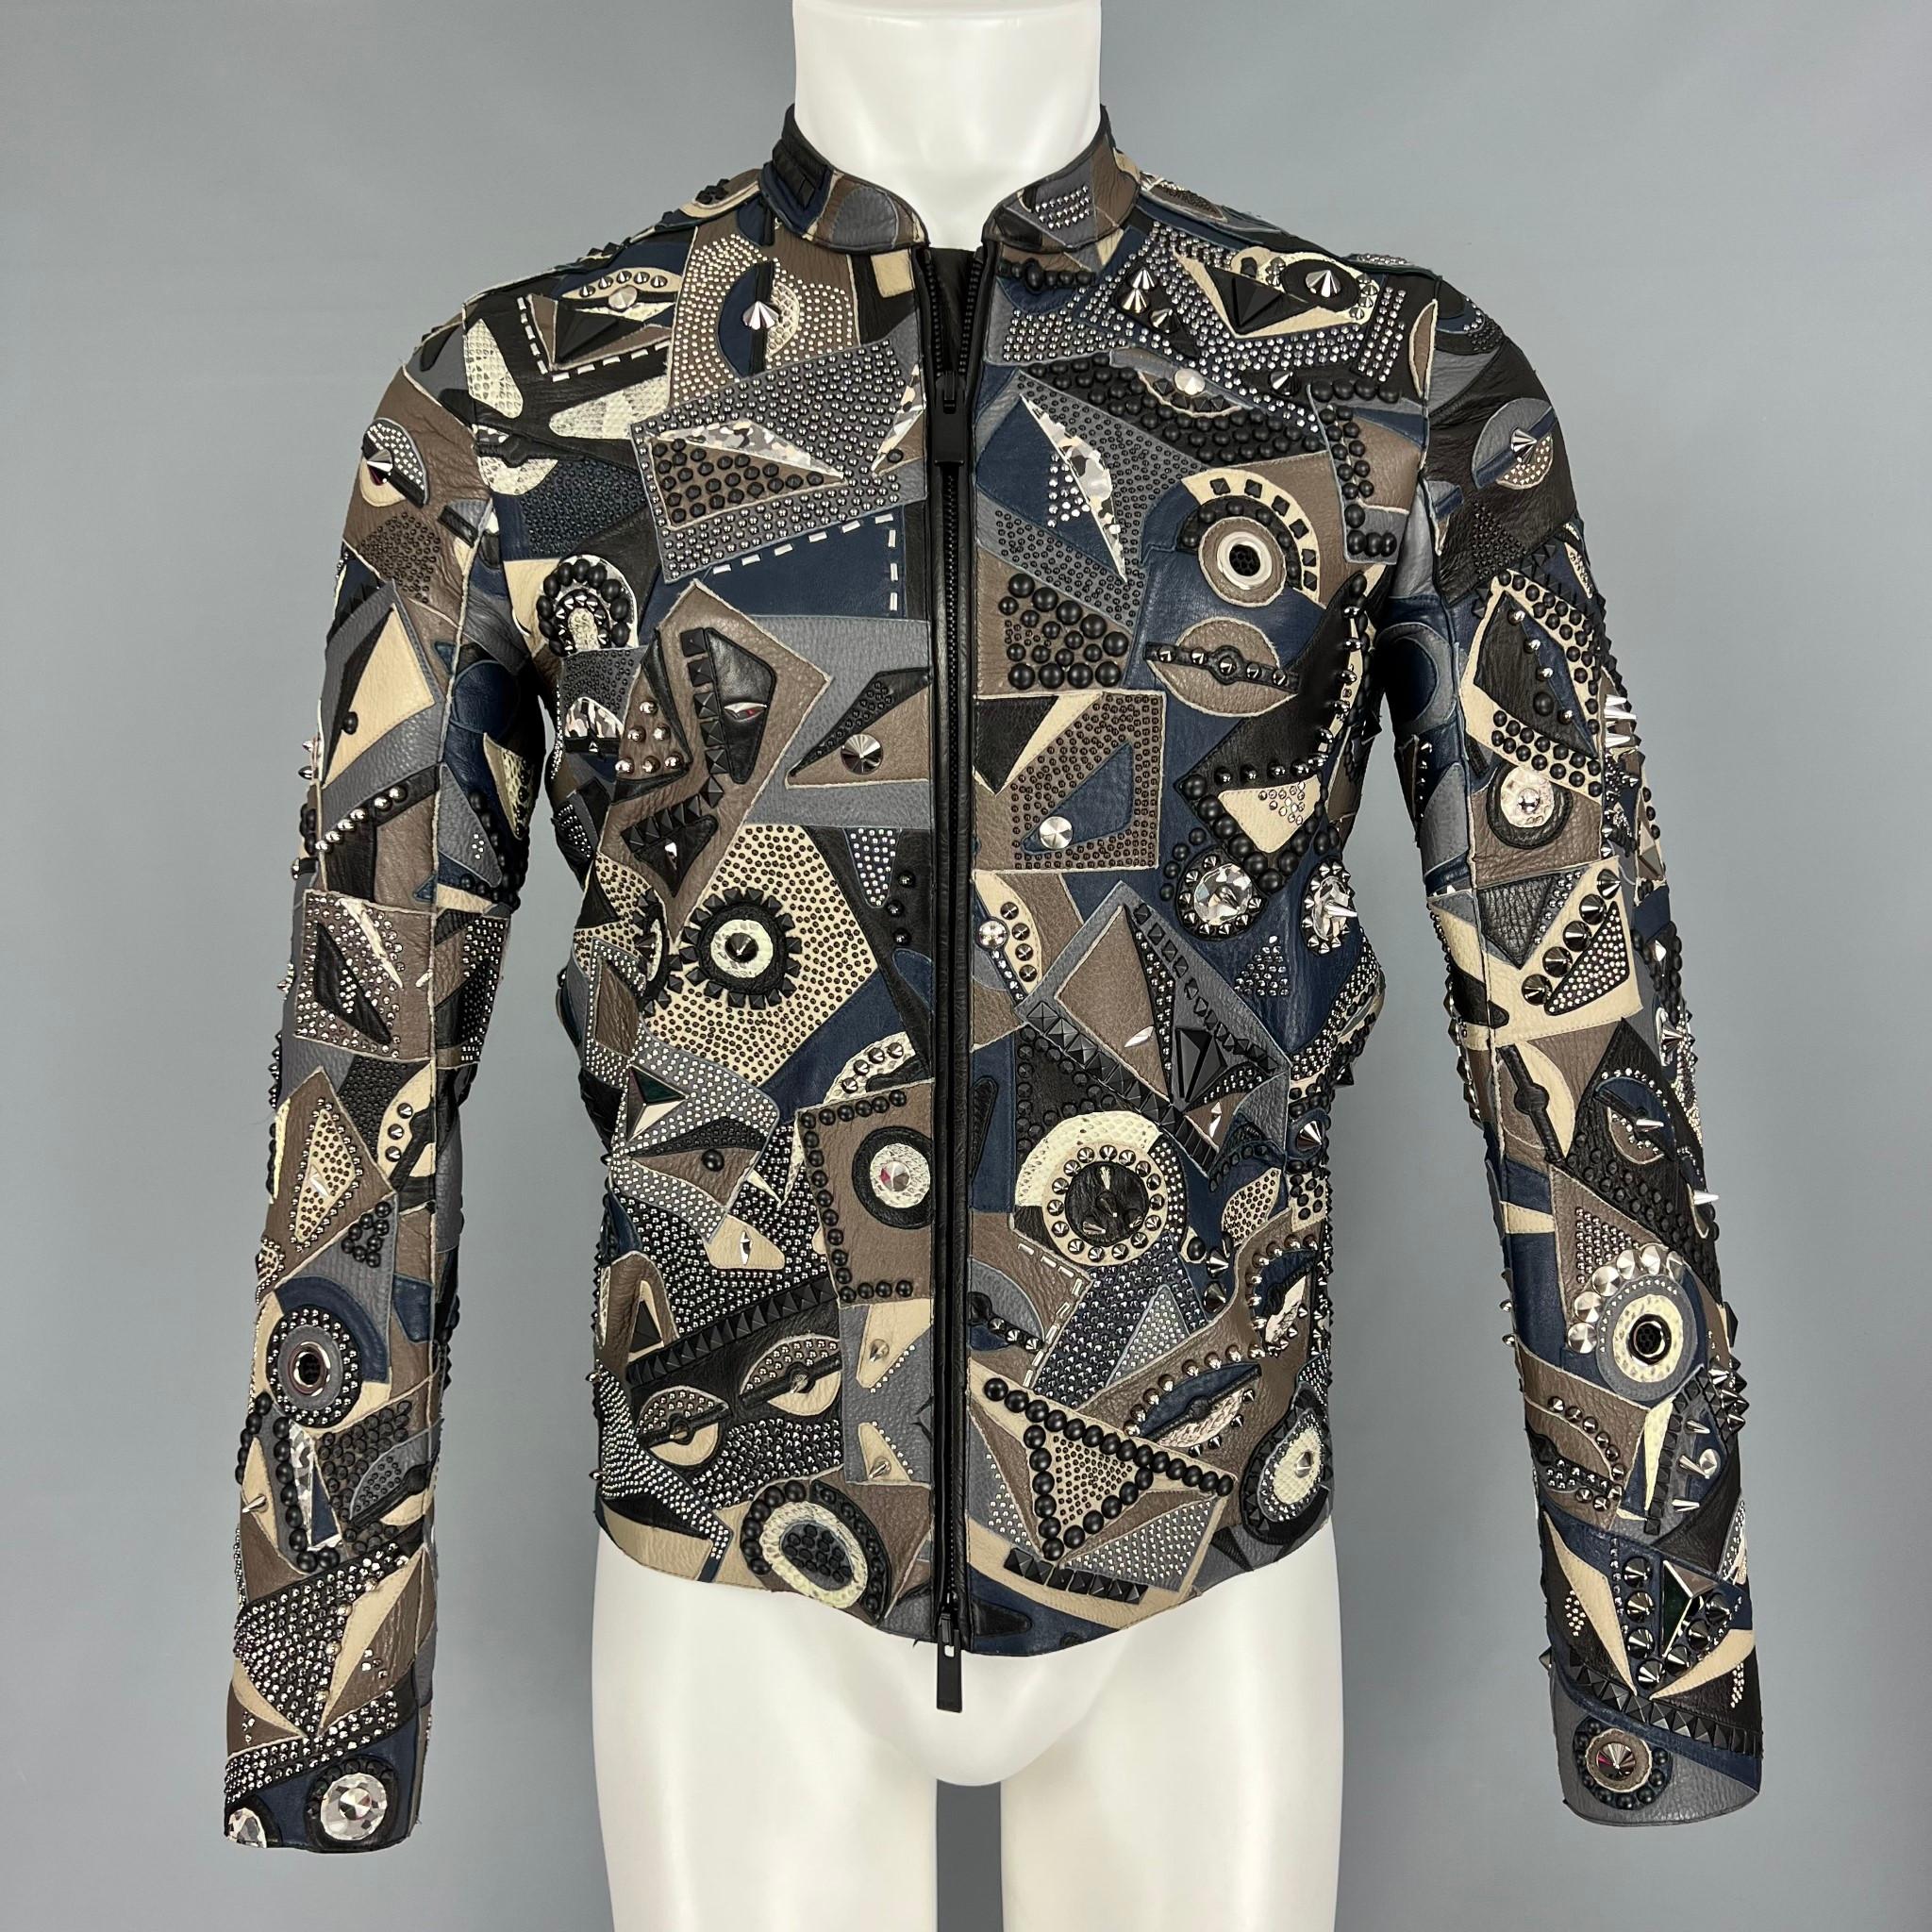 Fendi Lamb, Deer and Water Snake (Python) Leather Moto Jacket from the Spring 2016 Menswear Collection featuring hues of Grey, Blue and Beige, allover iconic monster eye design with subtle owl eyes.  Studded accents throughout in various sizes. 